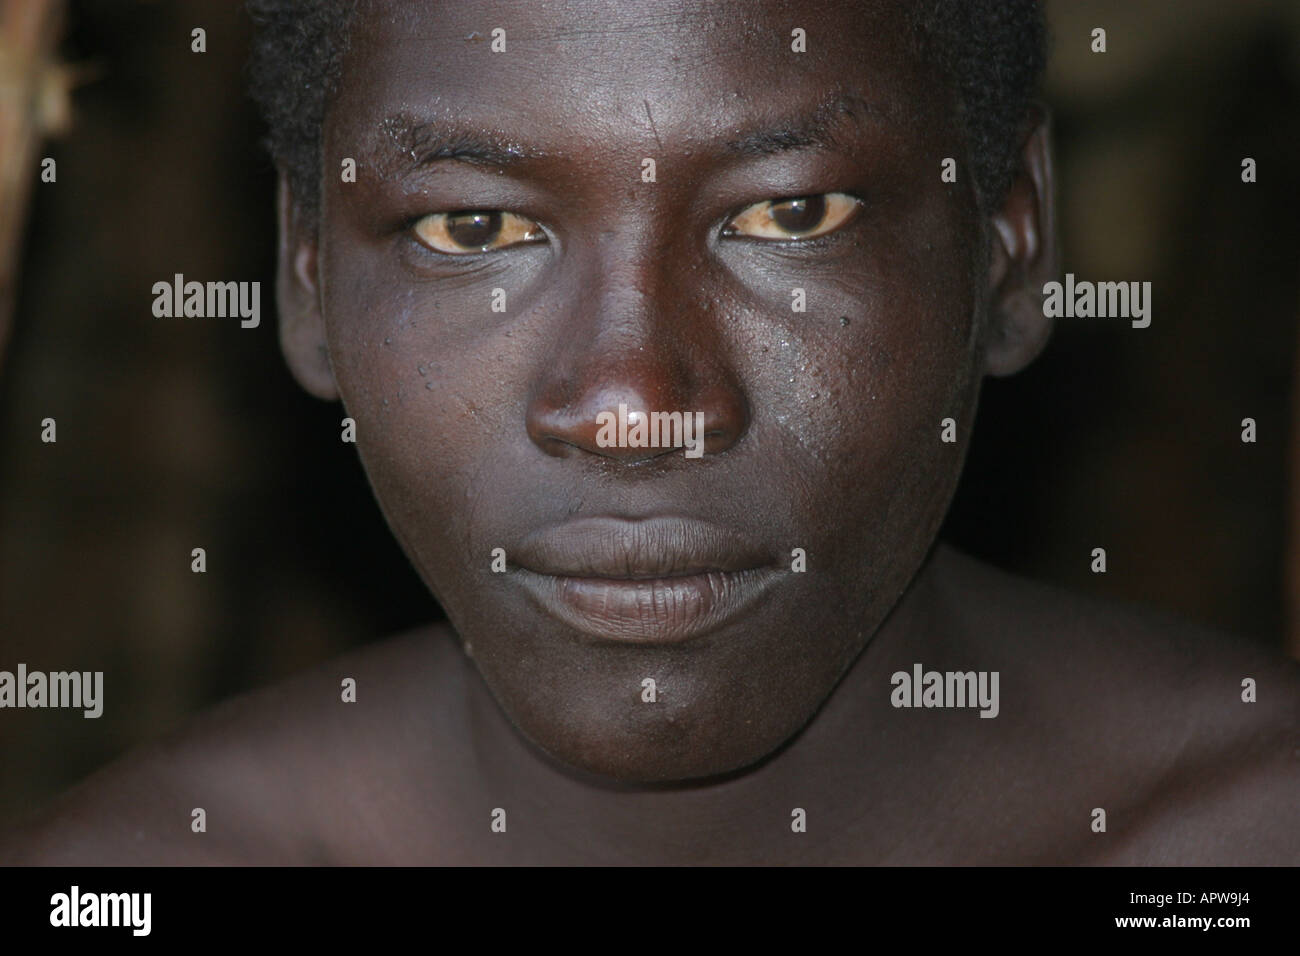 Young man with scarification on his face, Chad Stock Photo - Alamy